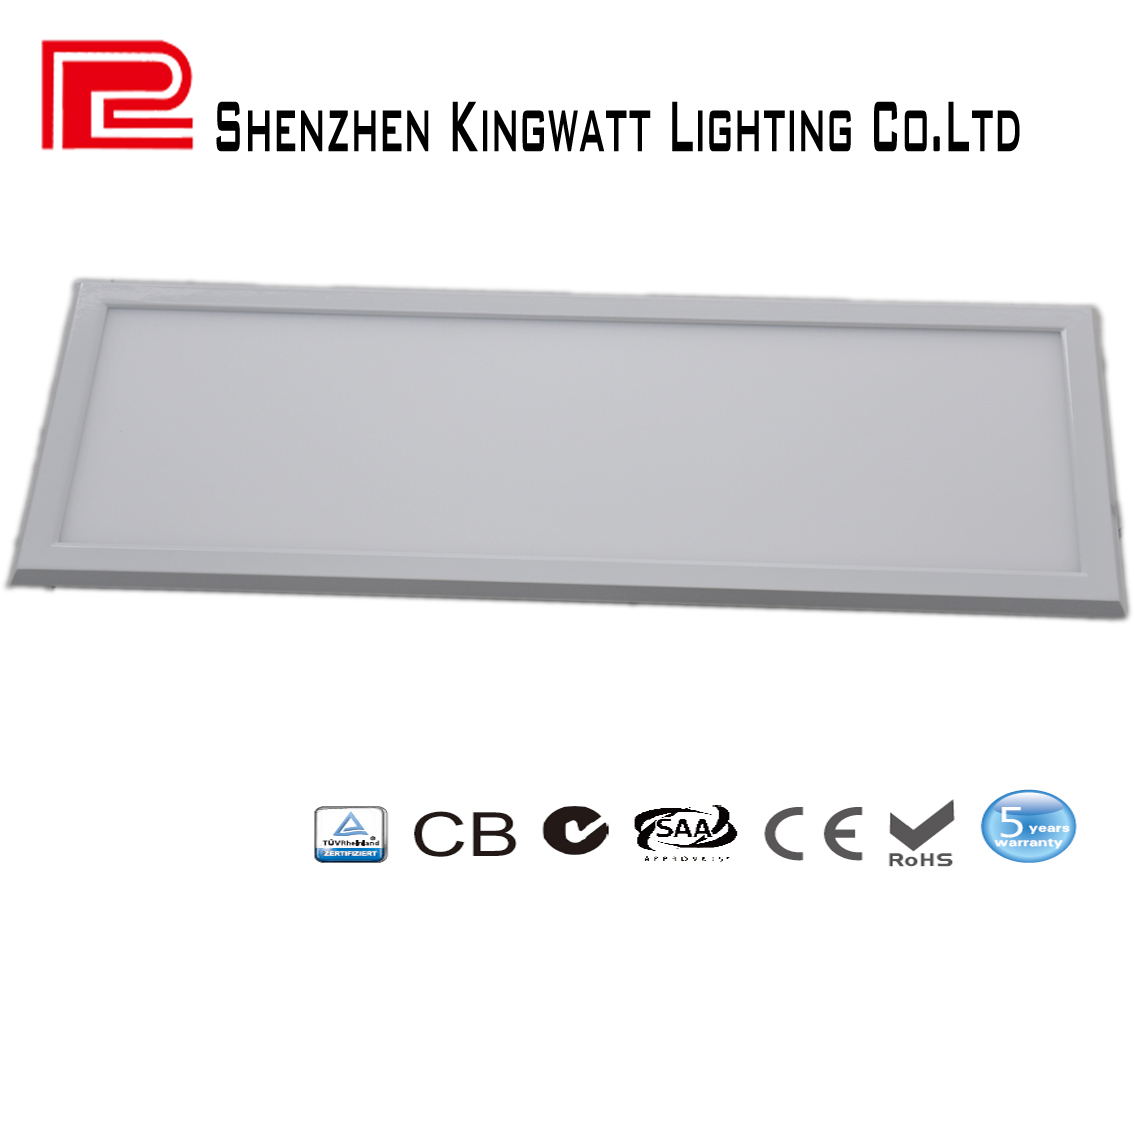 CB/CTEL/SAA/RoHS 100Lm/W LED Panel Light，300mm*600mm with 20W